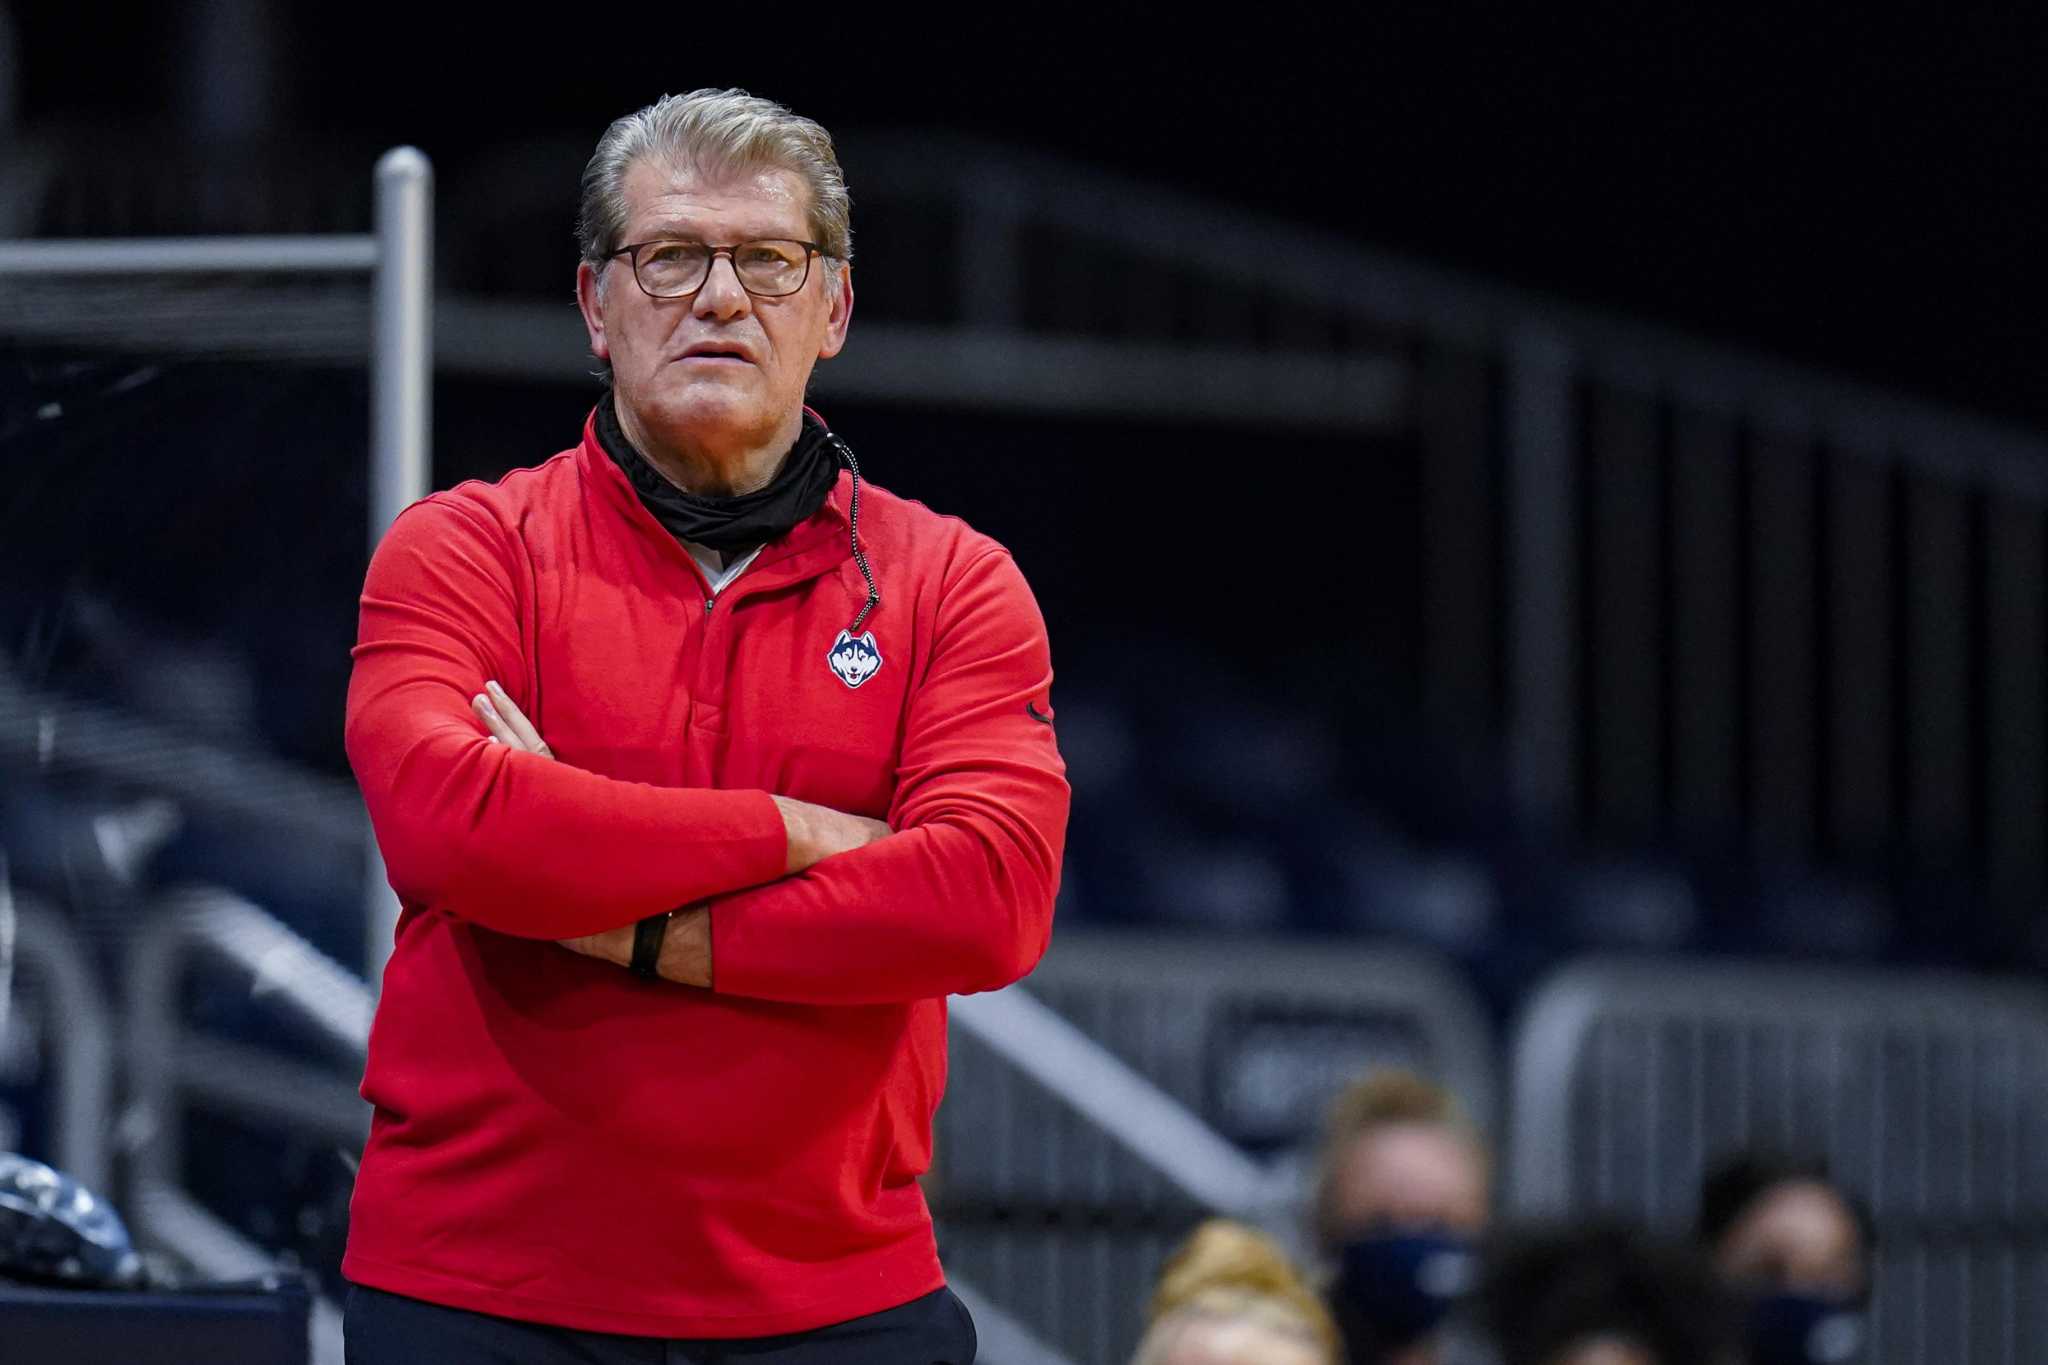 Complete shock': Geno Auriemma, UConn women's basketball coach, tests  positive for COVID-19